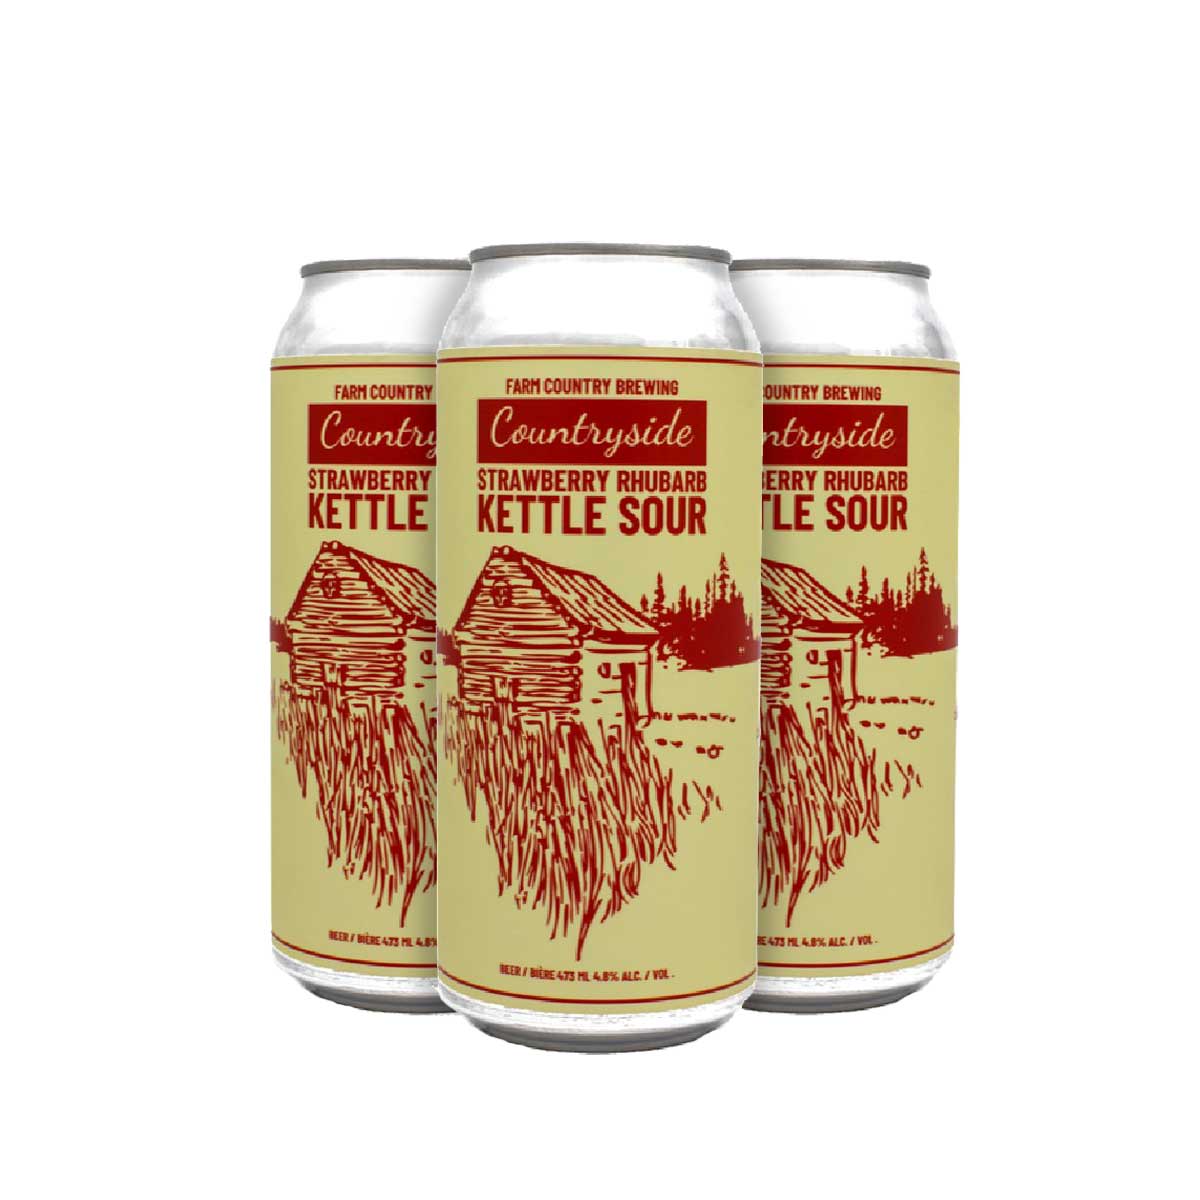 Farm Country Brewing Countryside Strawberry Rhubarb Kettle Sour 4 Pack Cans